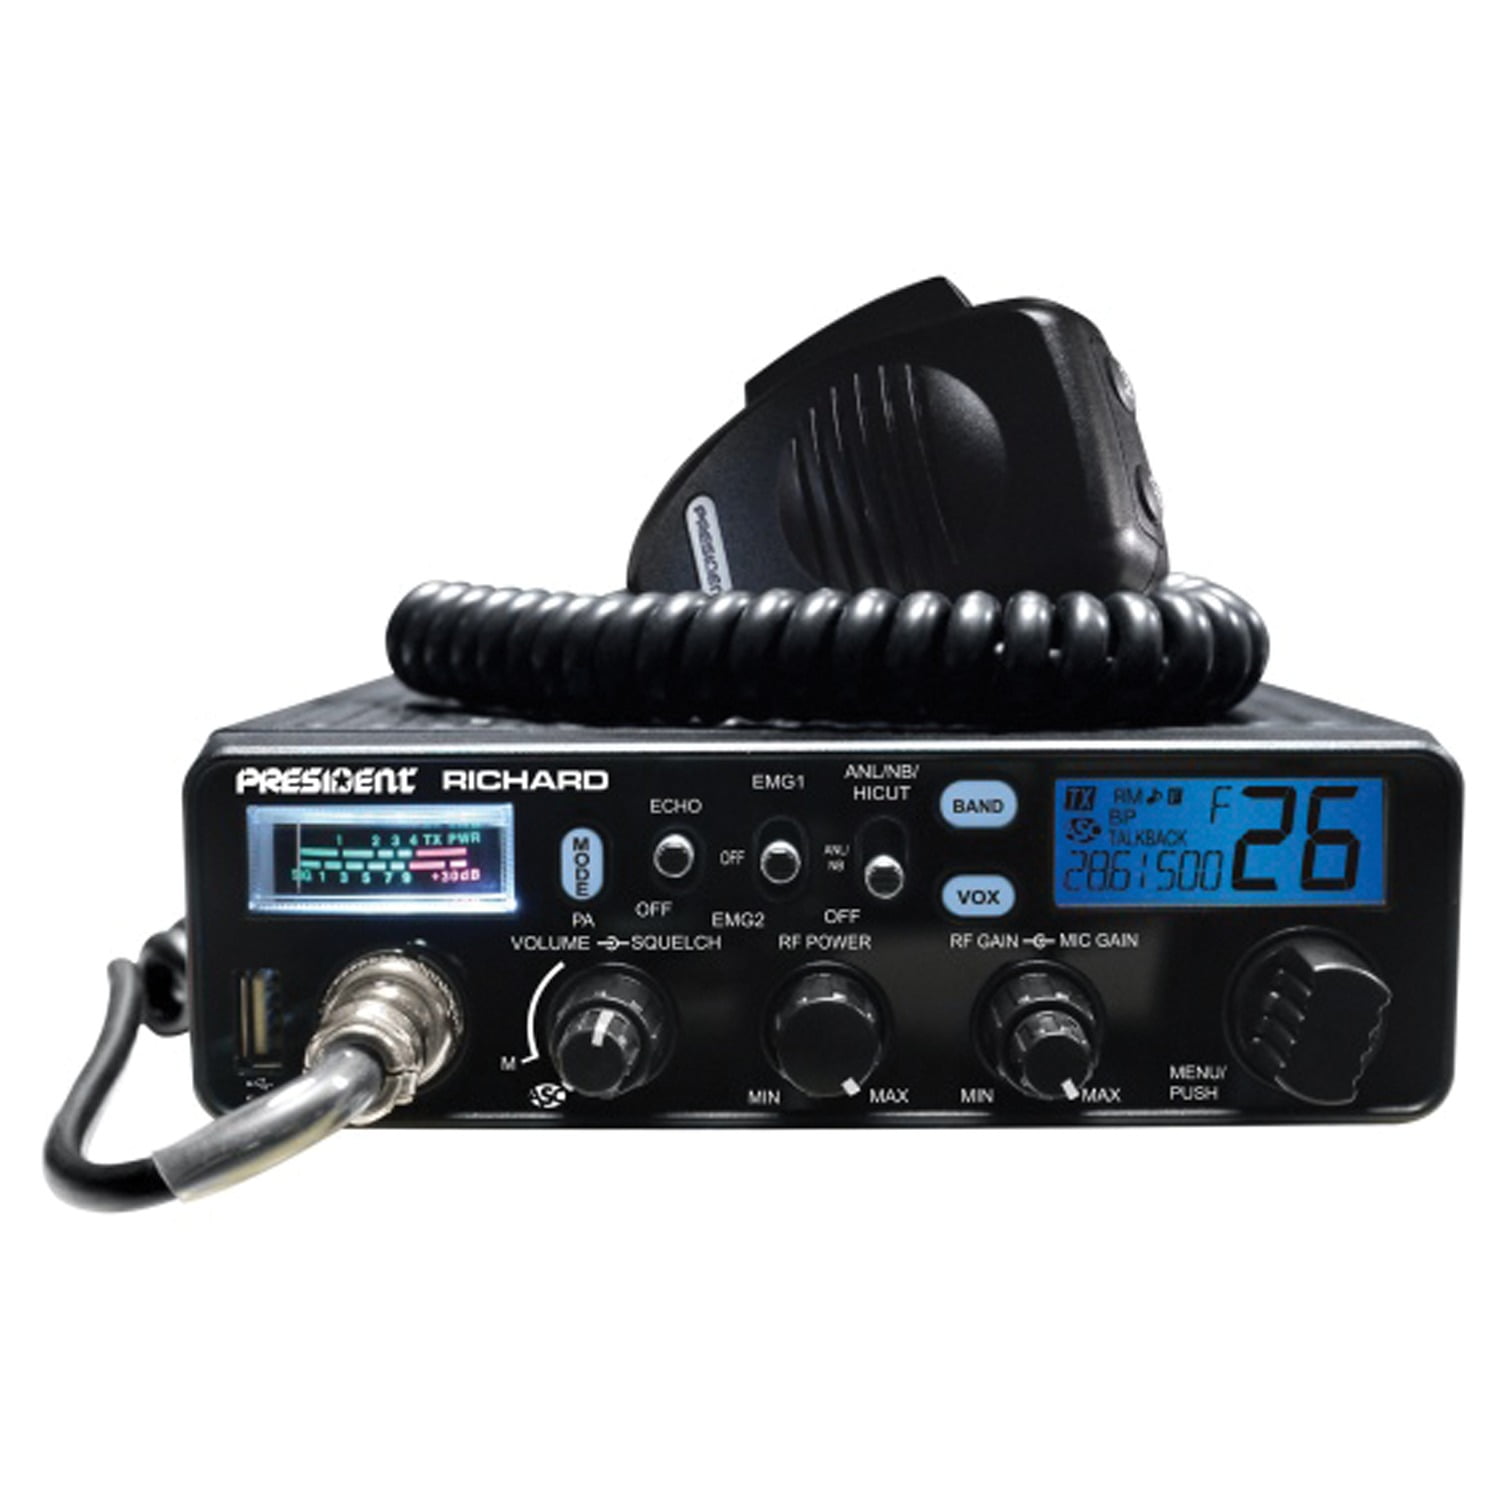 Picture of President RICHARD Richard 50 watt Pep AM &amp; FM 10m Transceiver with Continuous Scanning